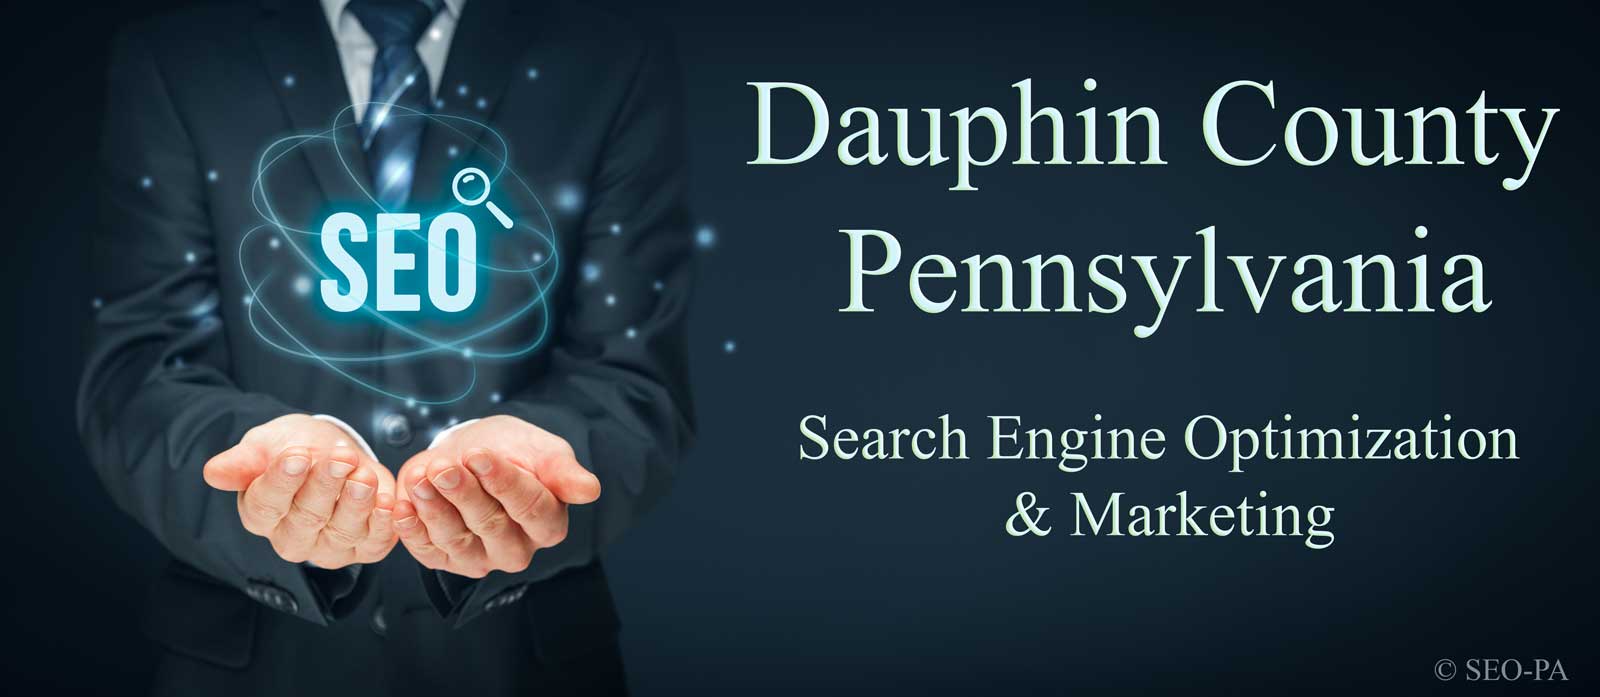 Dauphin County, Pa Search Engine Optimization SEO Services